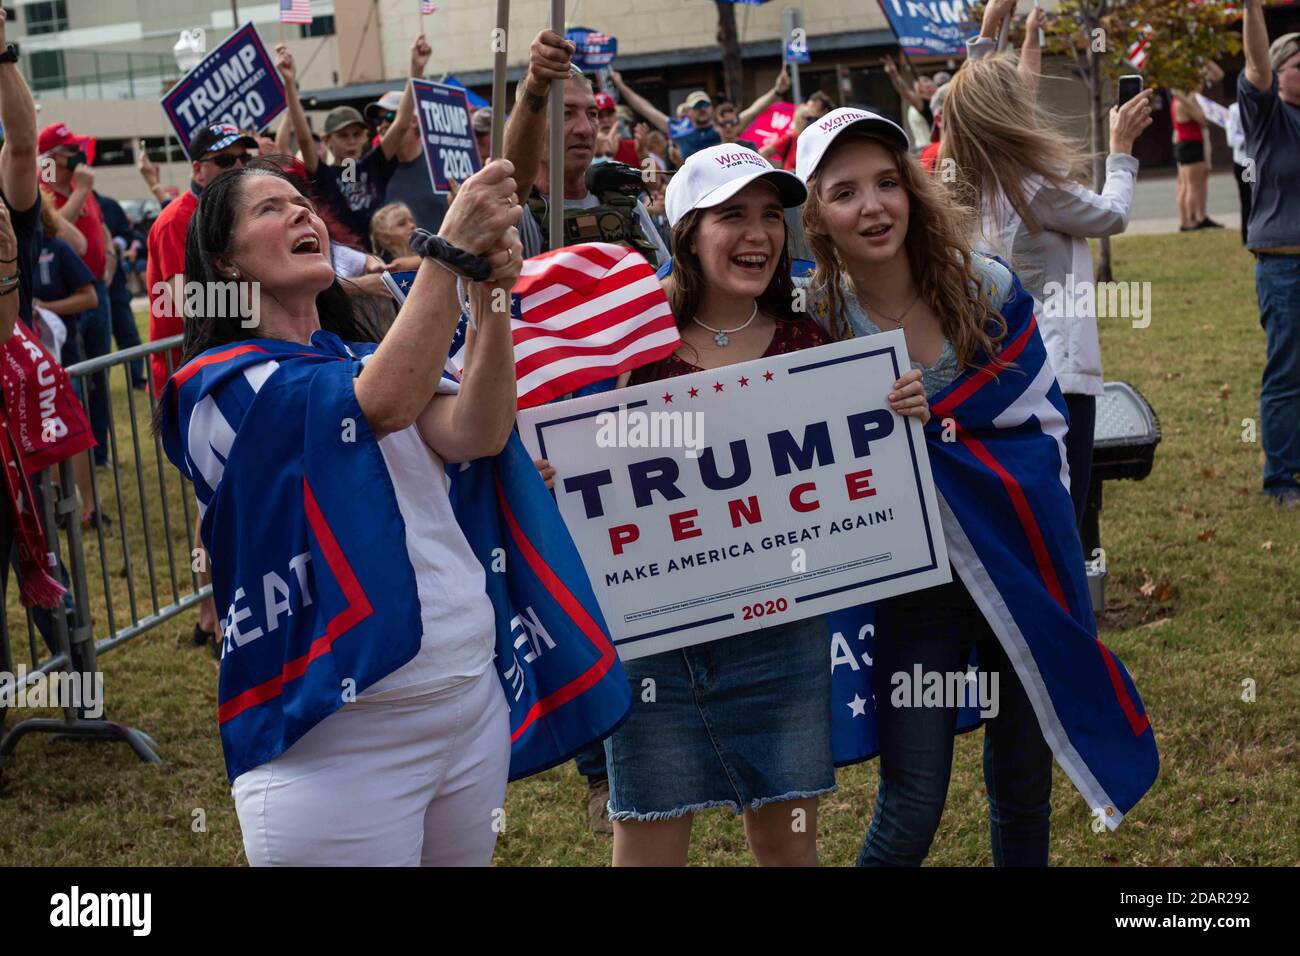 Fort Worth, Texas, USA. 14th Nov, 2020. 11/14/20 Fort Worth, Texas - Three women from Wichita Falls smile and chant while a massive crowd of Trump Supporters protests the 2020 Presidential Election in Fort Worth, Texas. Credit: Chris Rusanowsky/ZUMA Wire/Alamy Live News Stock Photo